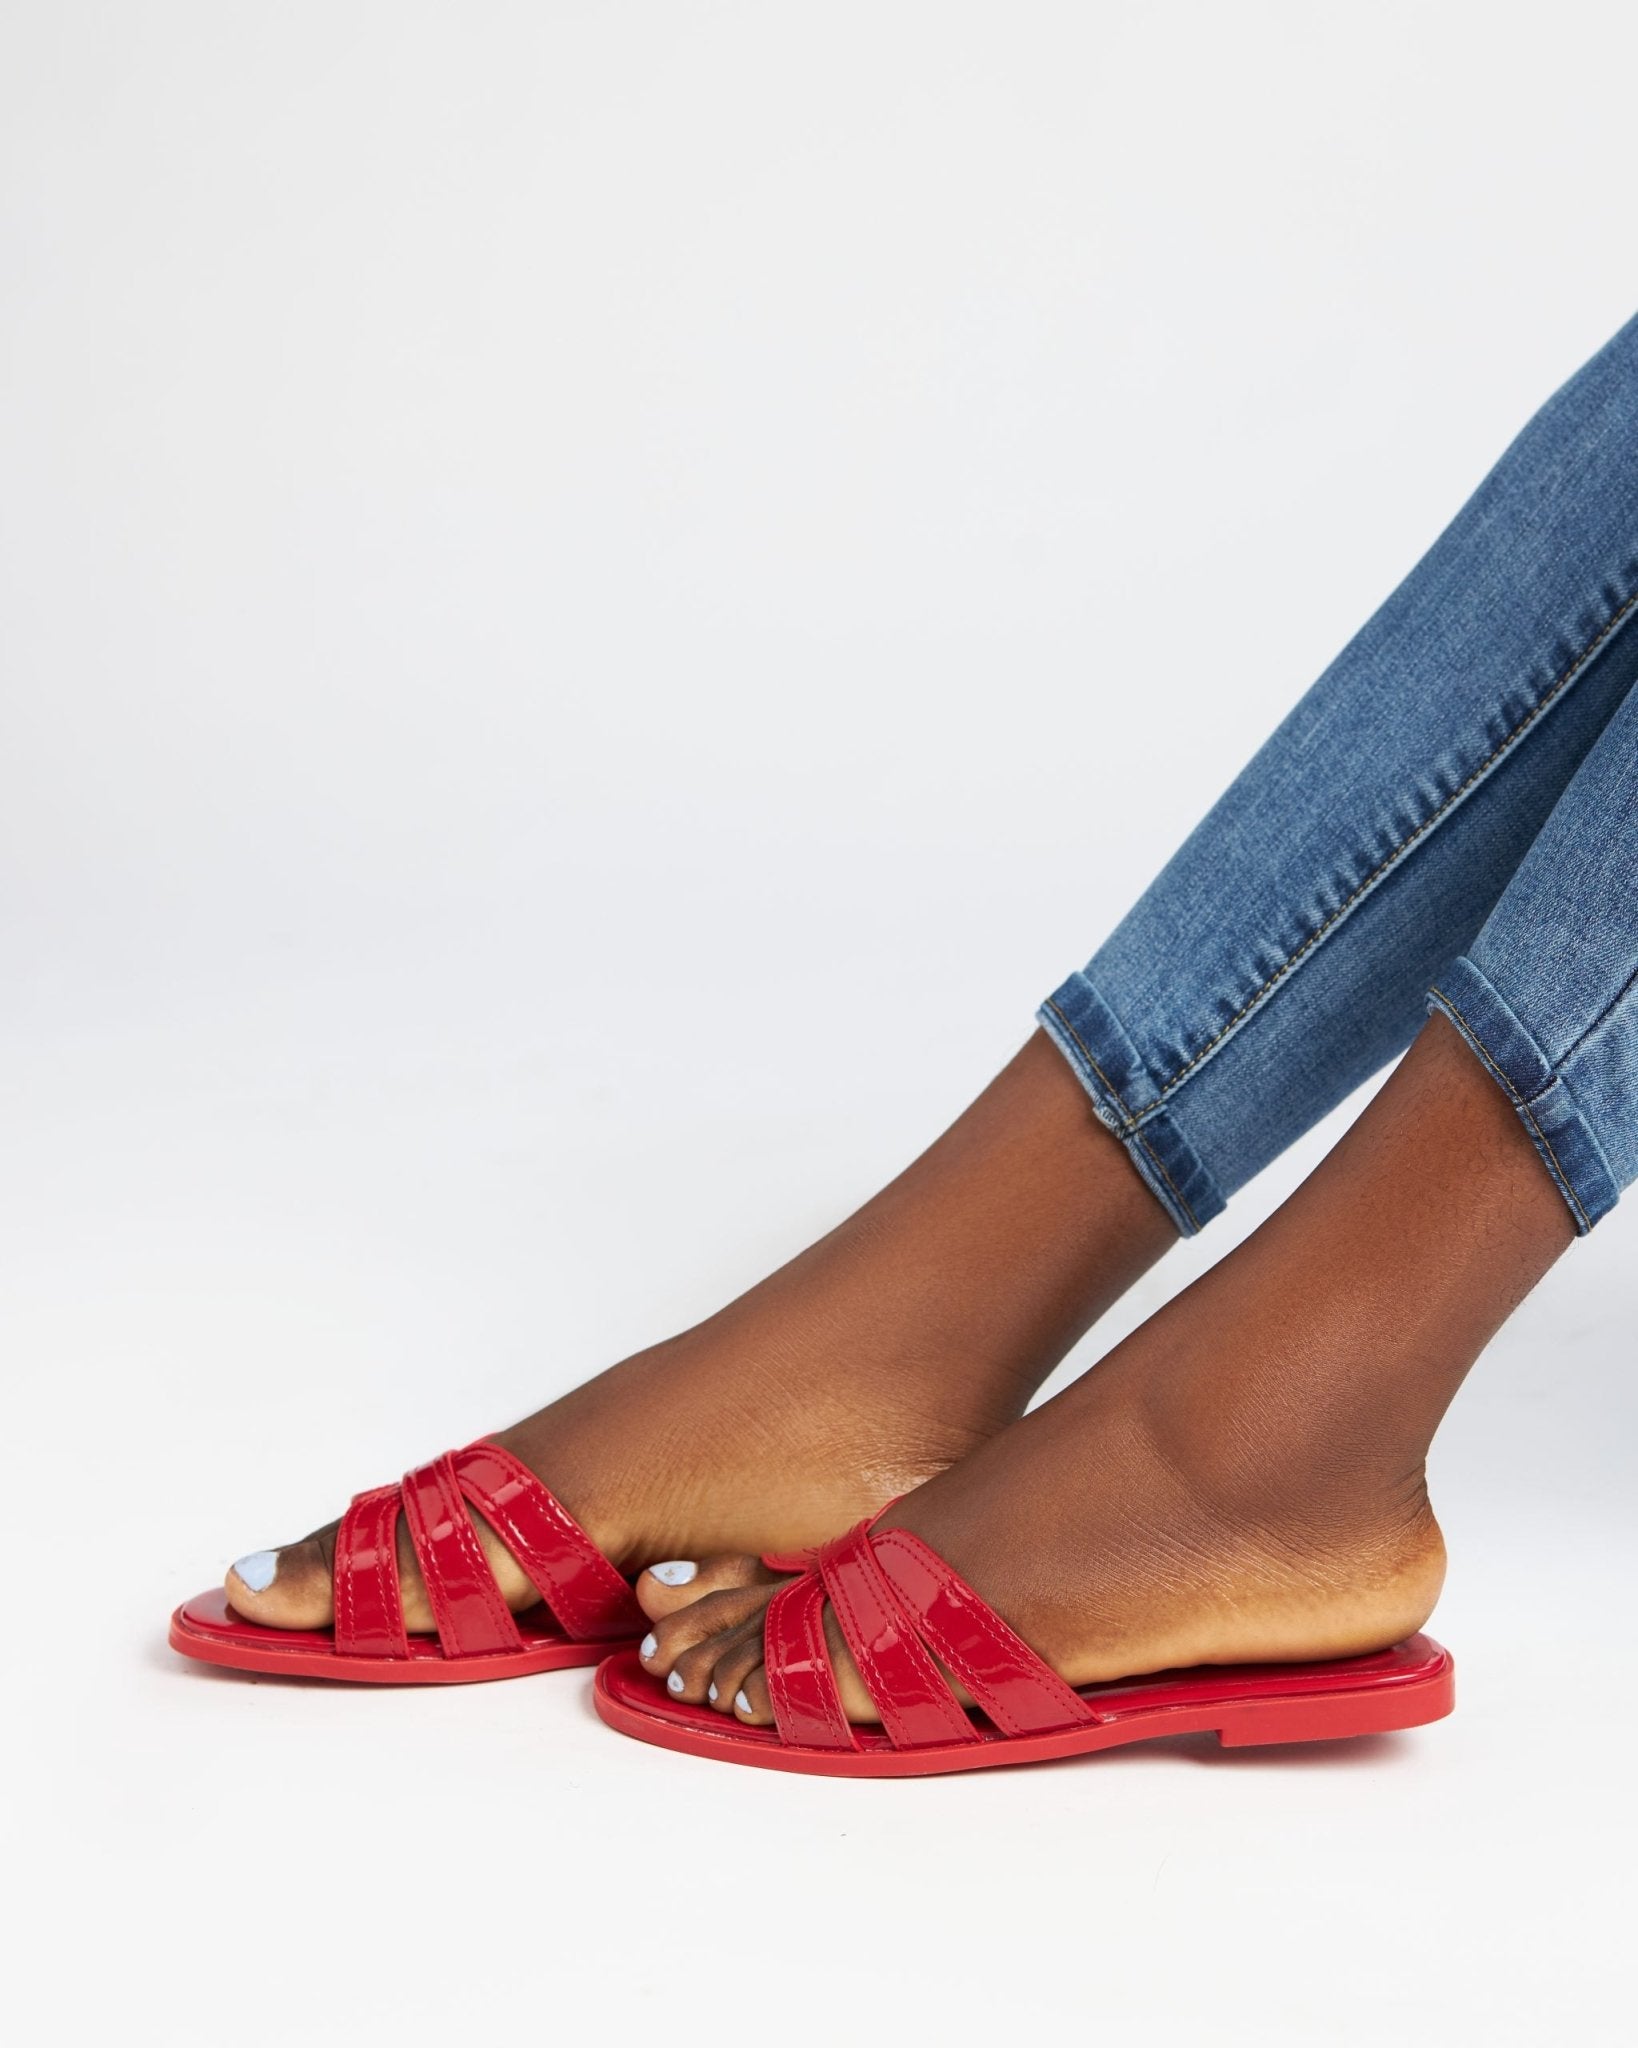 Chic Leather Slides in Red - Outlash brand